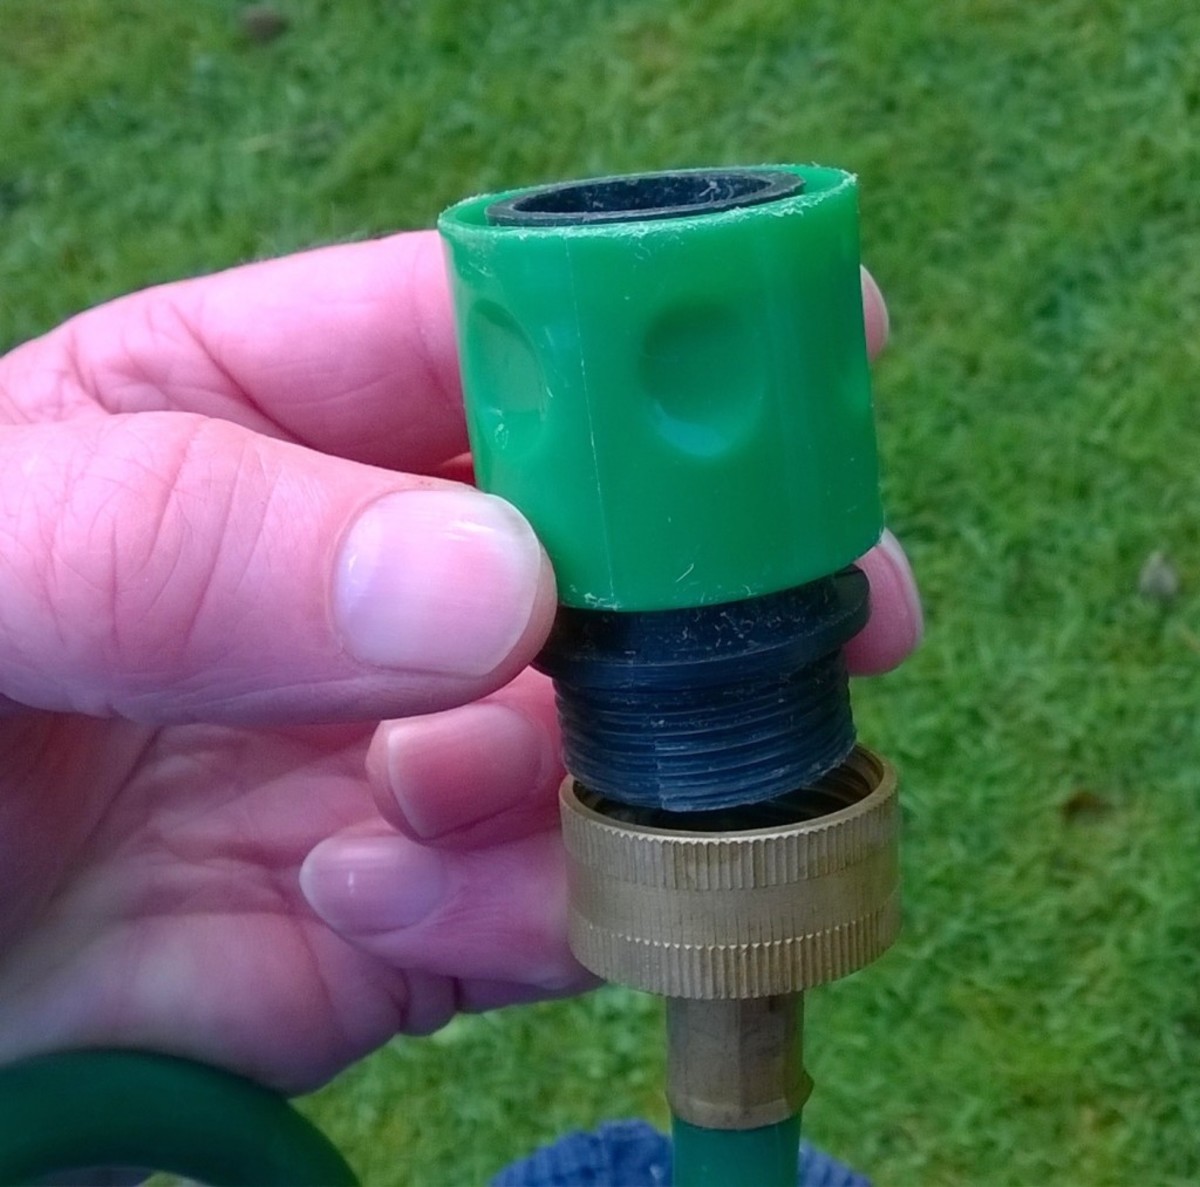 US hoses normally come with a female threaded fitting on the bib end. A quick connect adapter can be screwed into this to allow the hose to be push fit onto the bib.